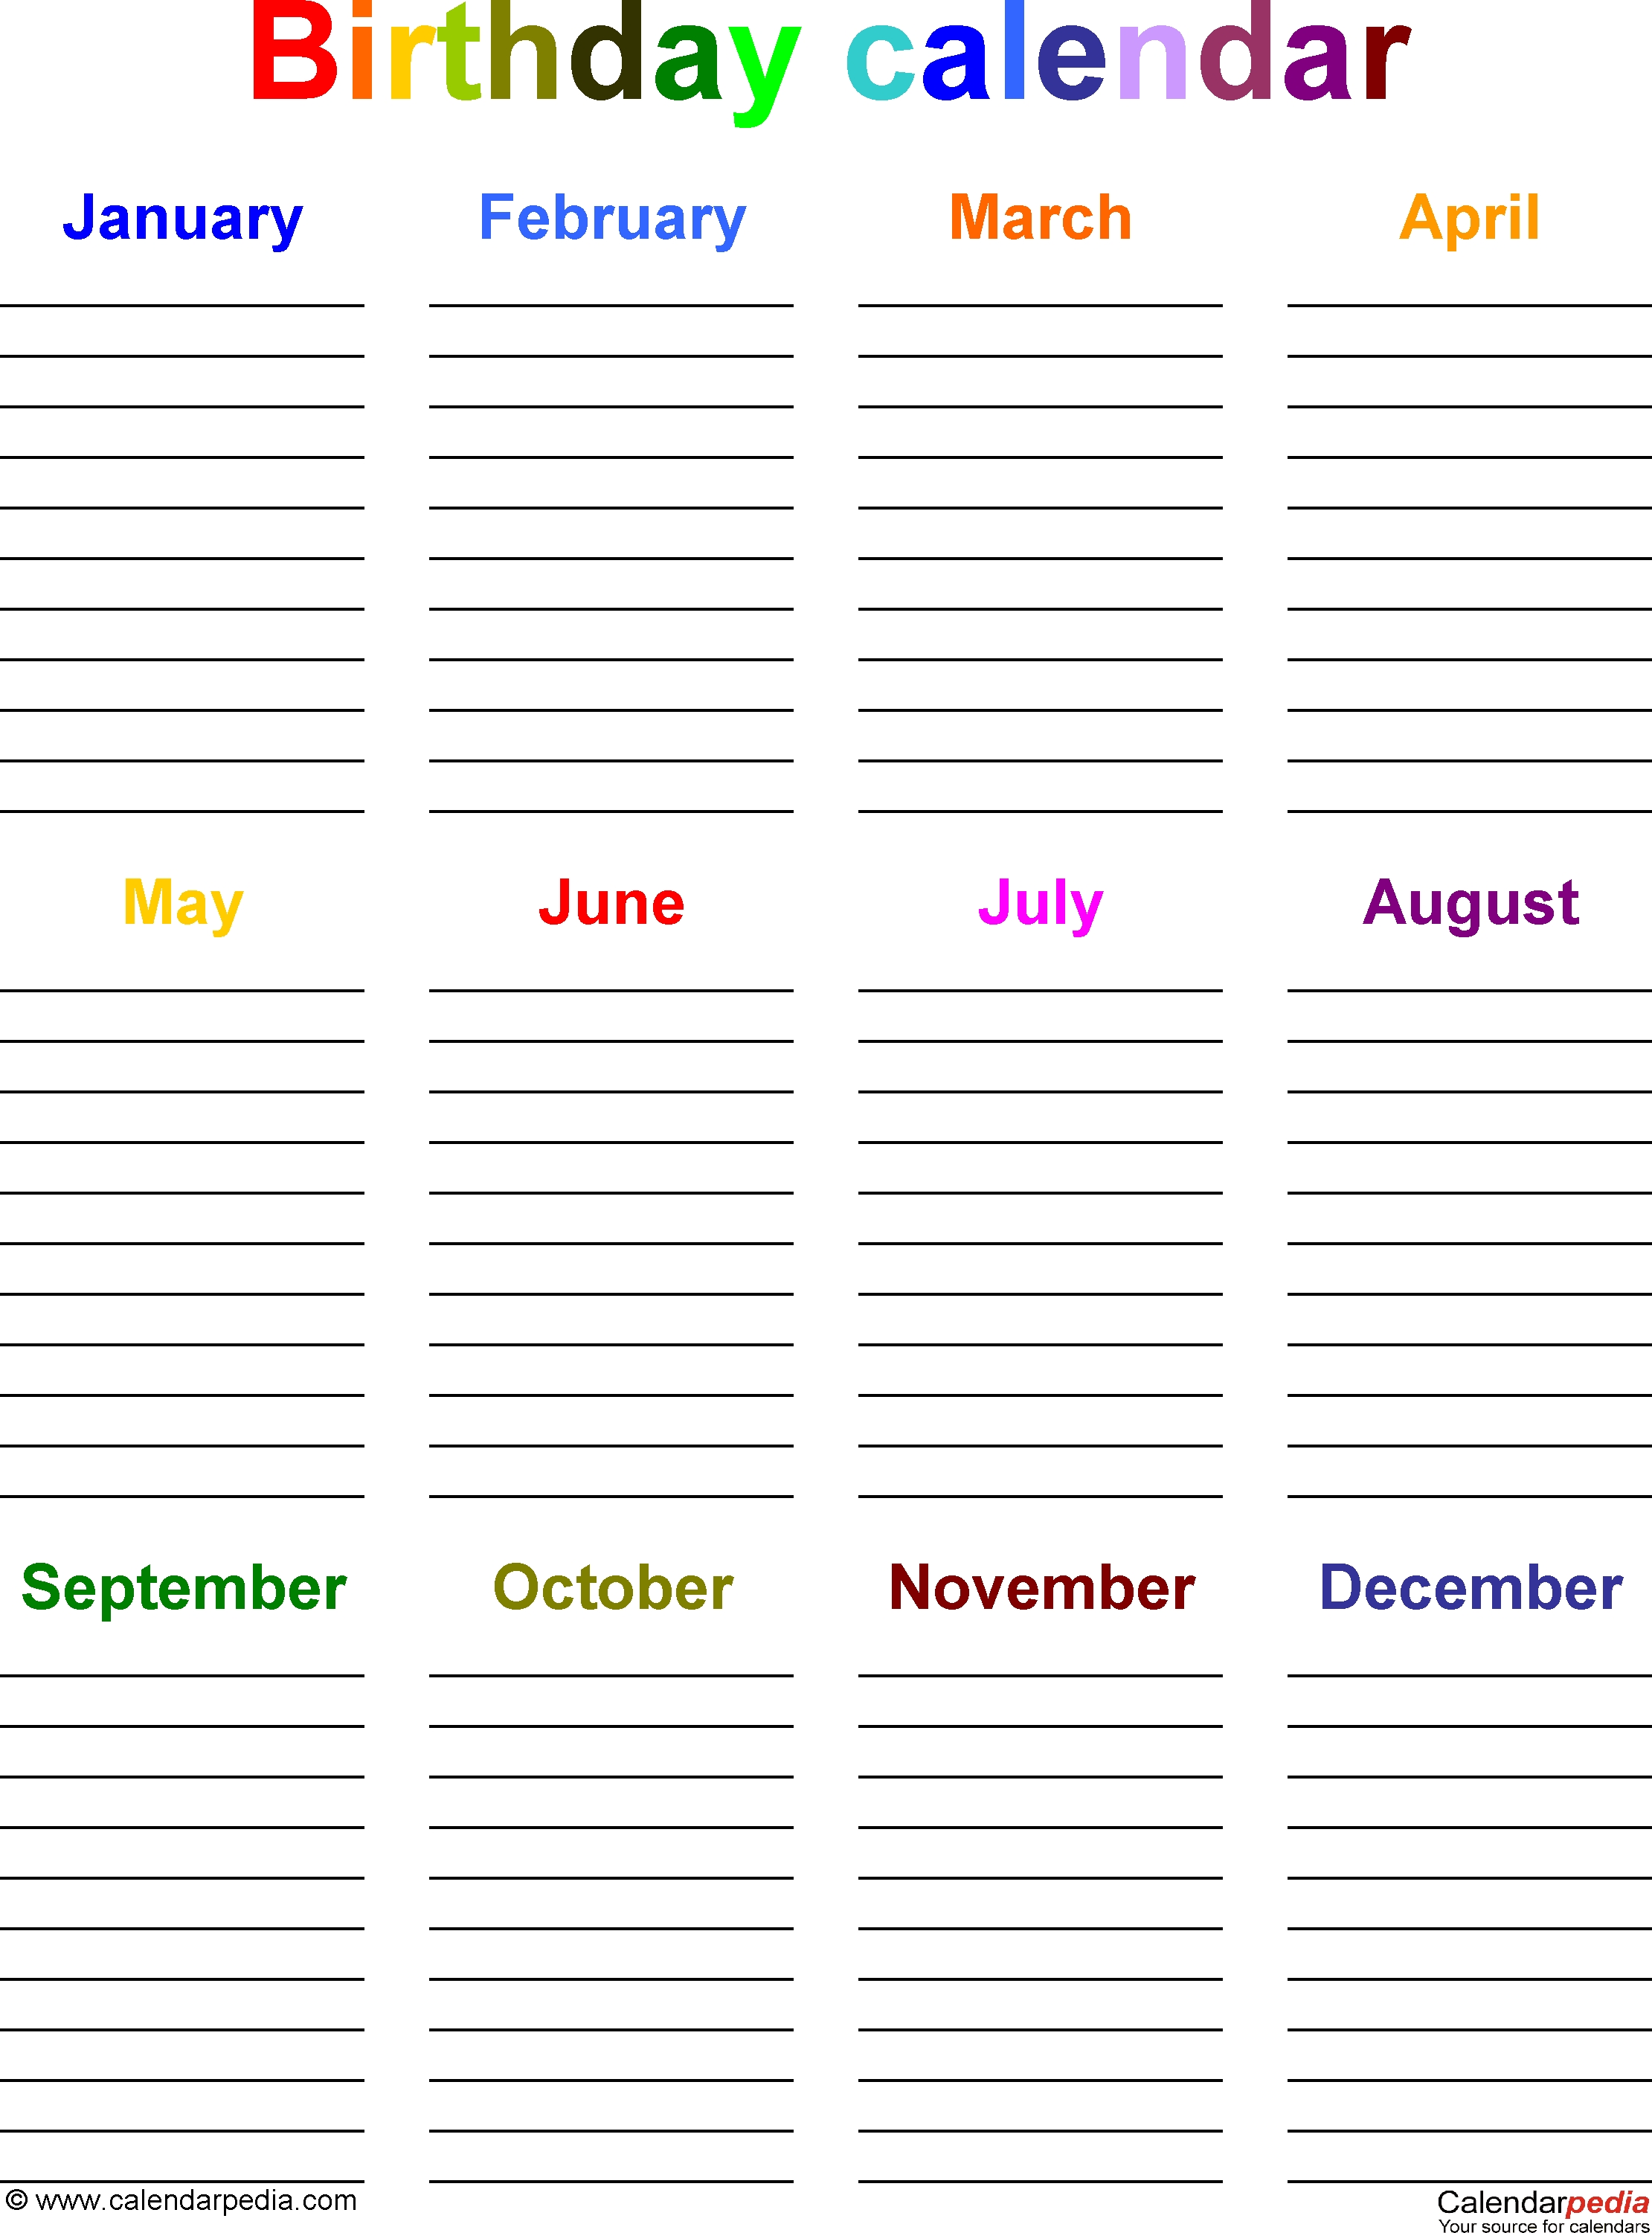 Birthday Calendars - 7 Free Printable Word Templates-Printable Monthly Calendar By Month For 2020 81/2 X 11